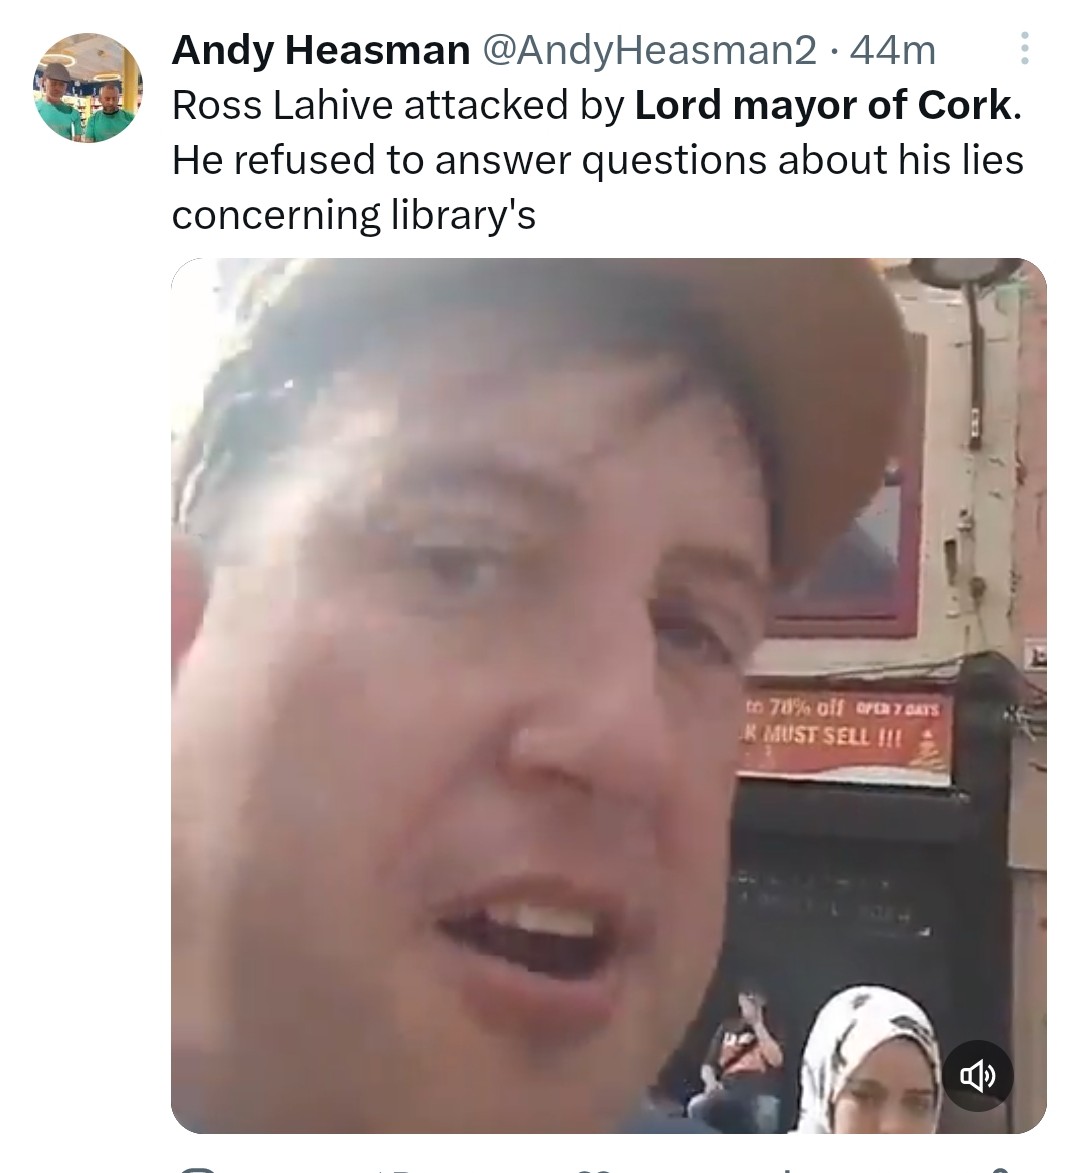 The Lord Mayor of Cork is a legend😆😆😆. I don't know his name but he deserves a second term or whatever Mayor's do👏👏👏 #lordmayorcork